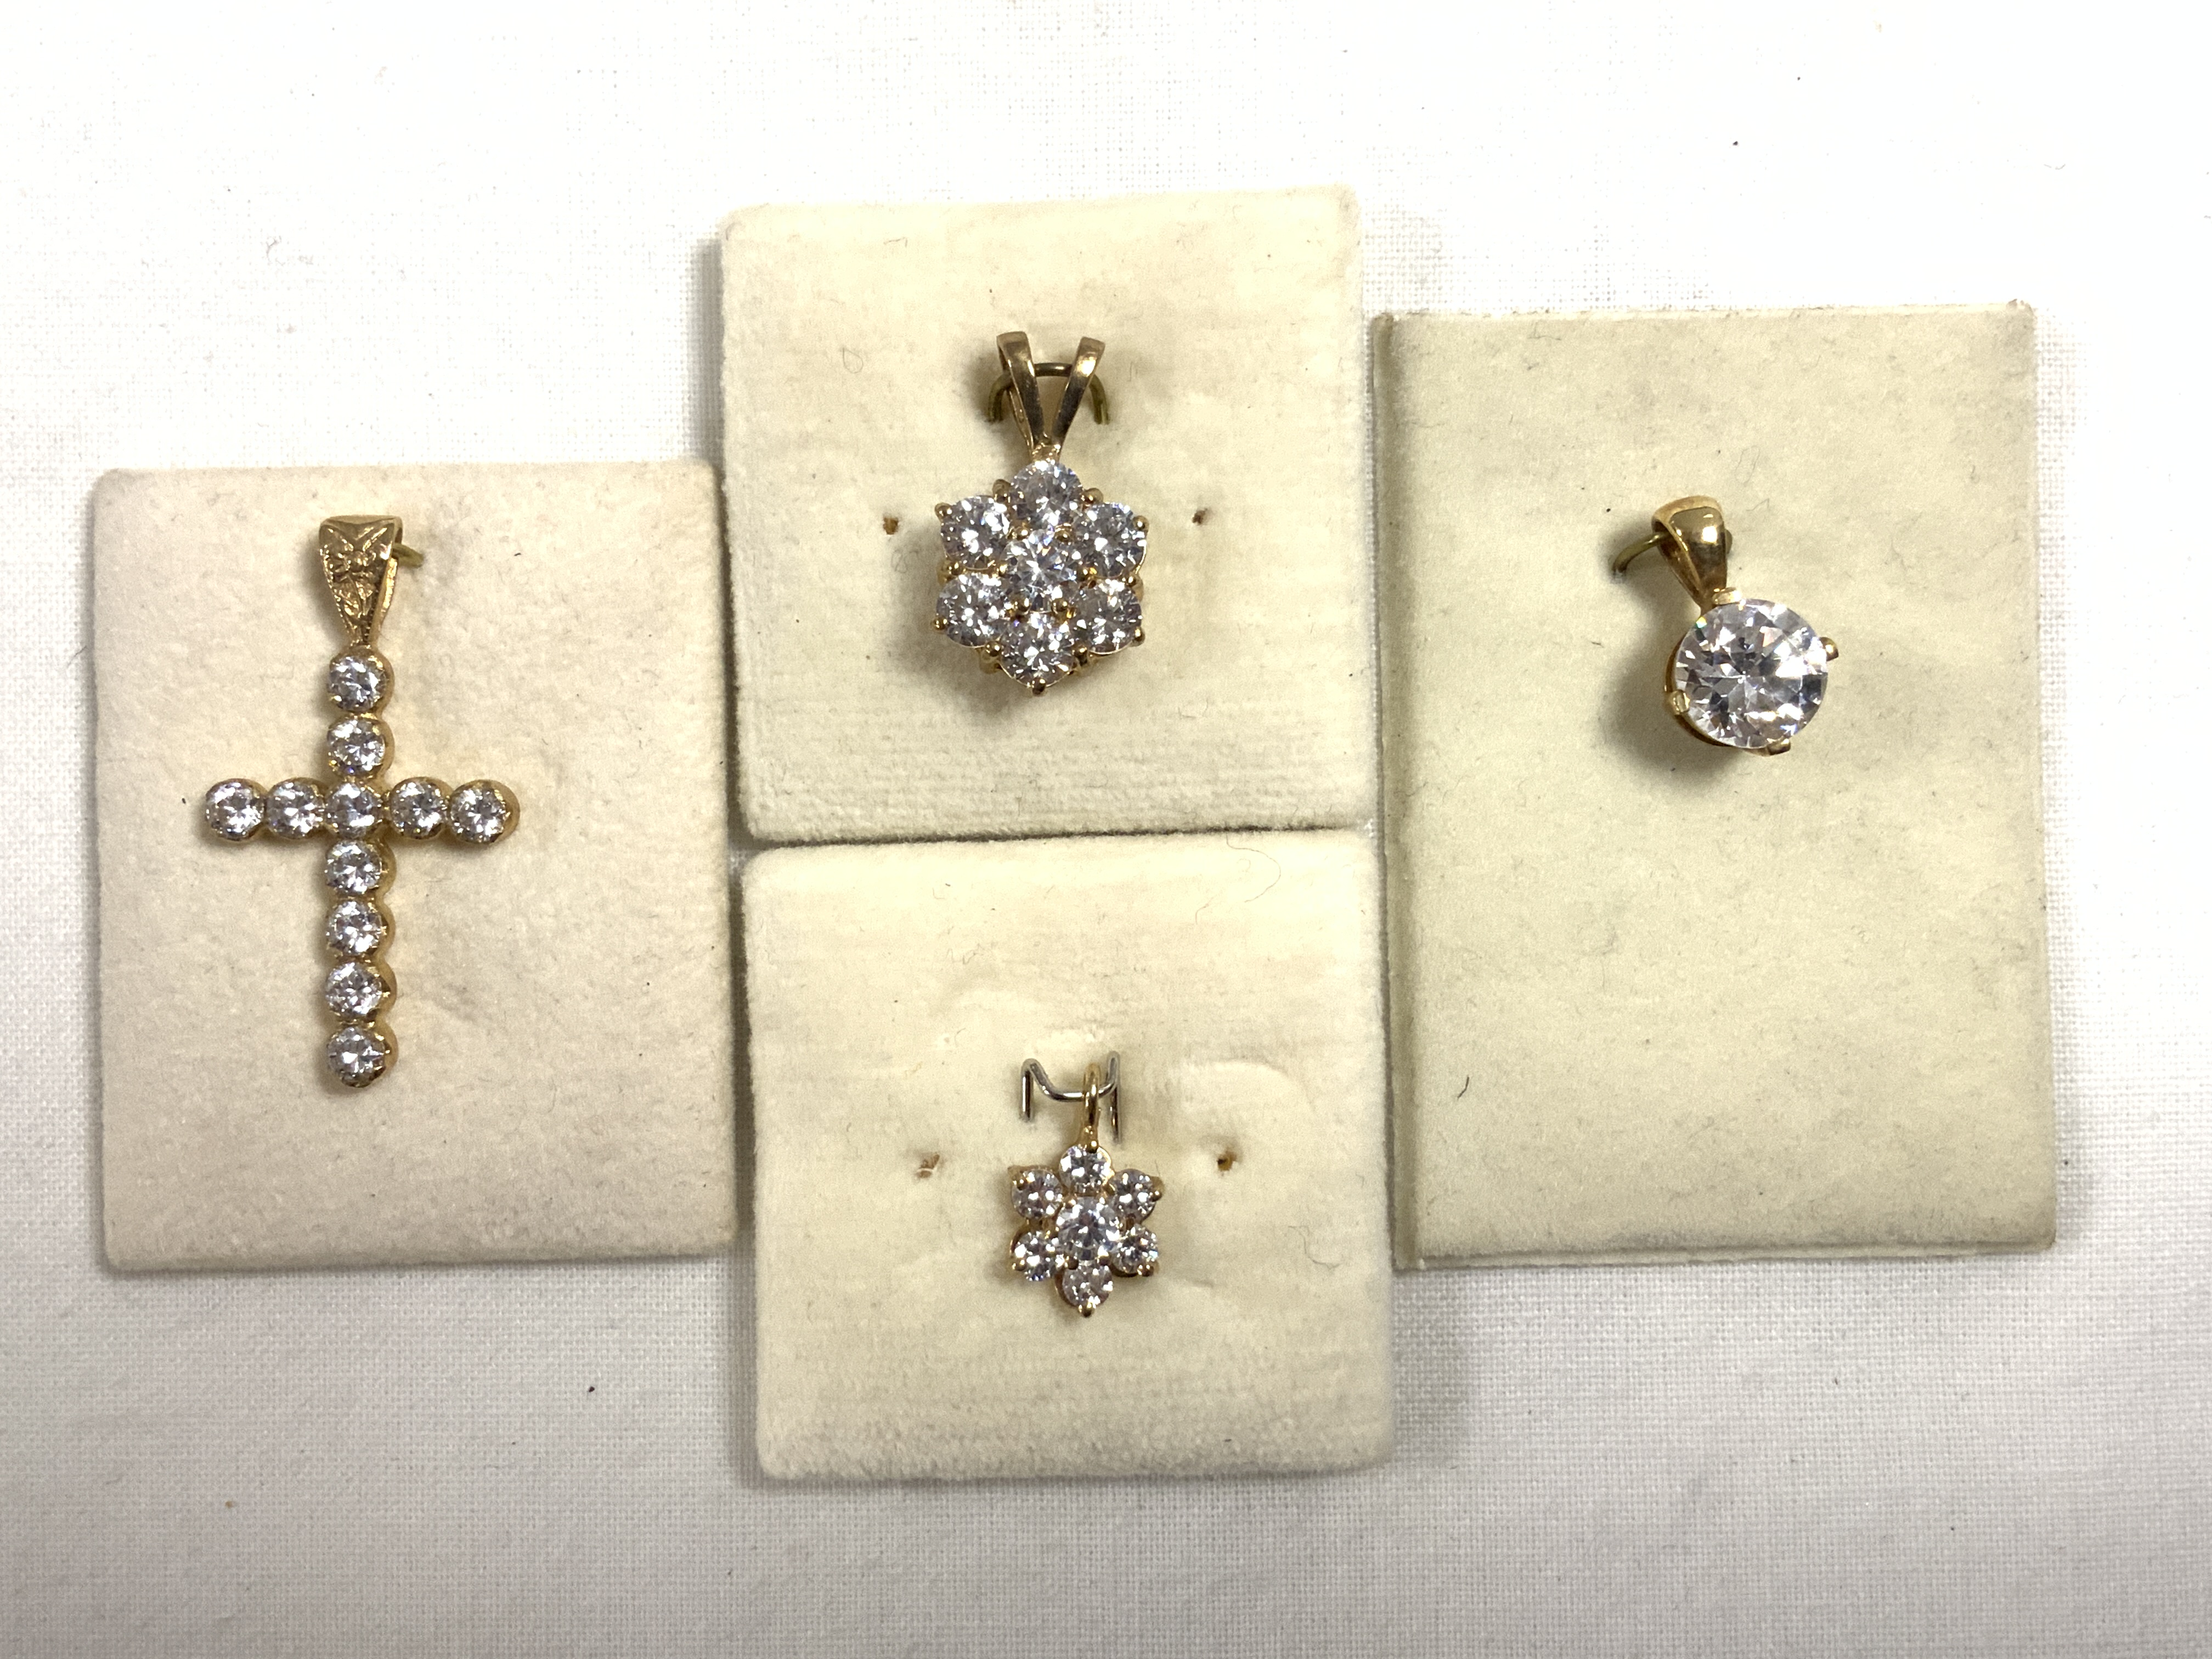 FOUR 375 GOLD PENDANTS - Image 2 of 4